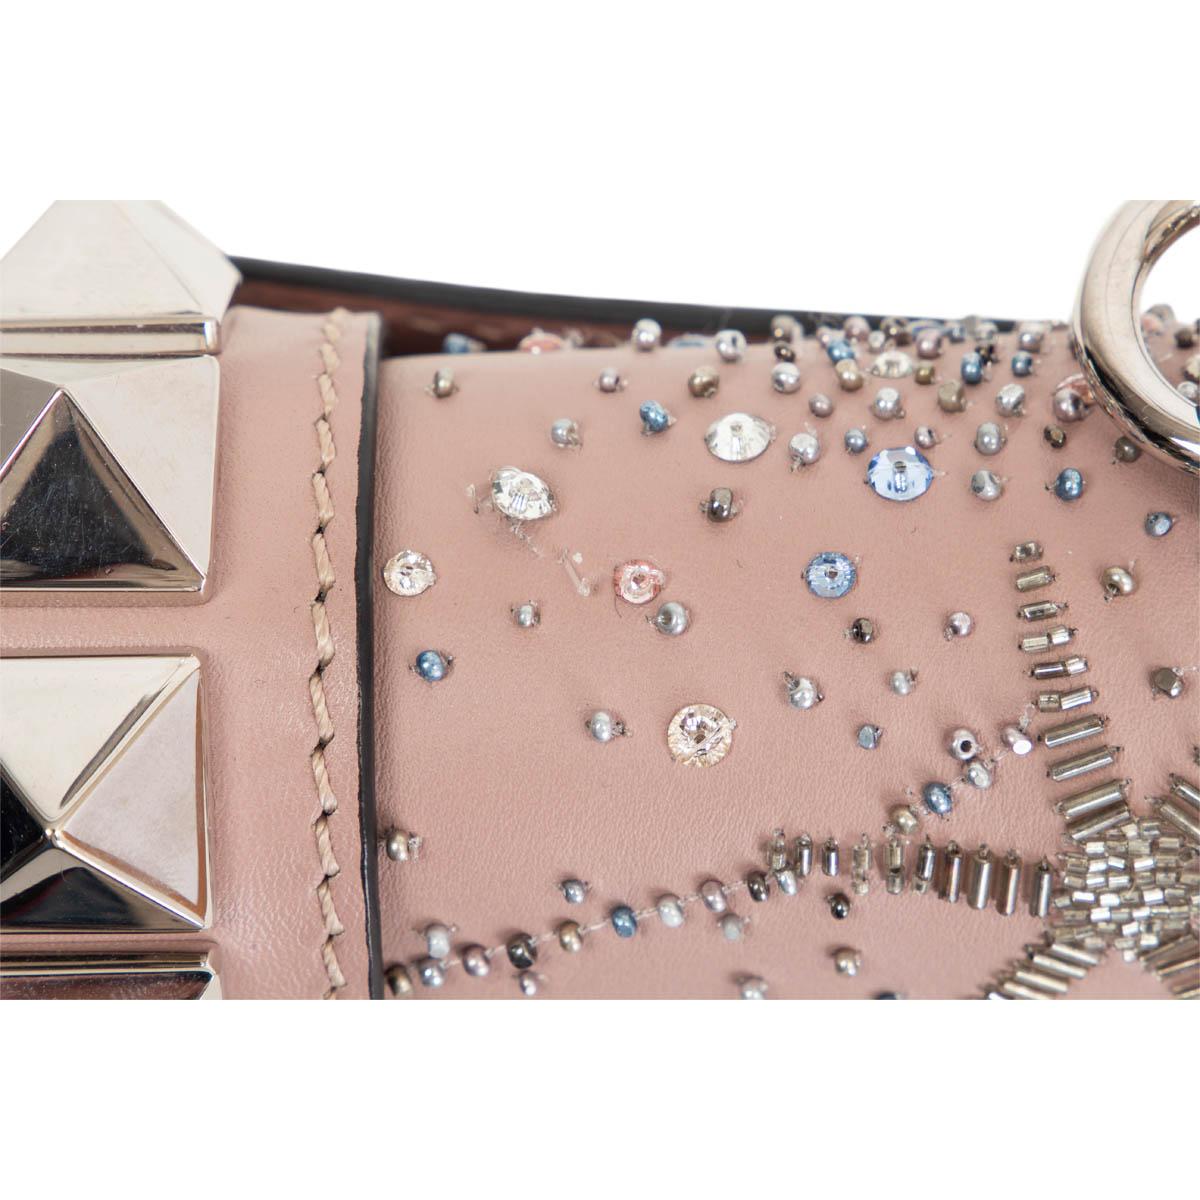 Women's VALENTINO pink leather CRYSTAL EMBELLISHED GLAM LOCK SMALL FLAP Bag Powder For Sale